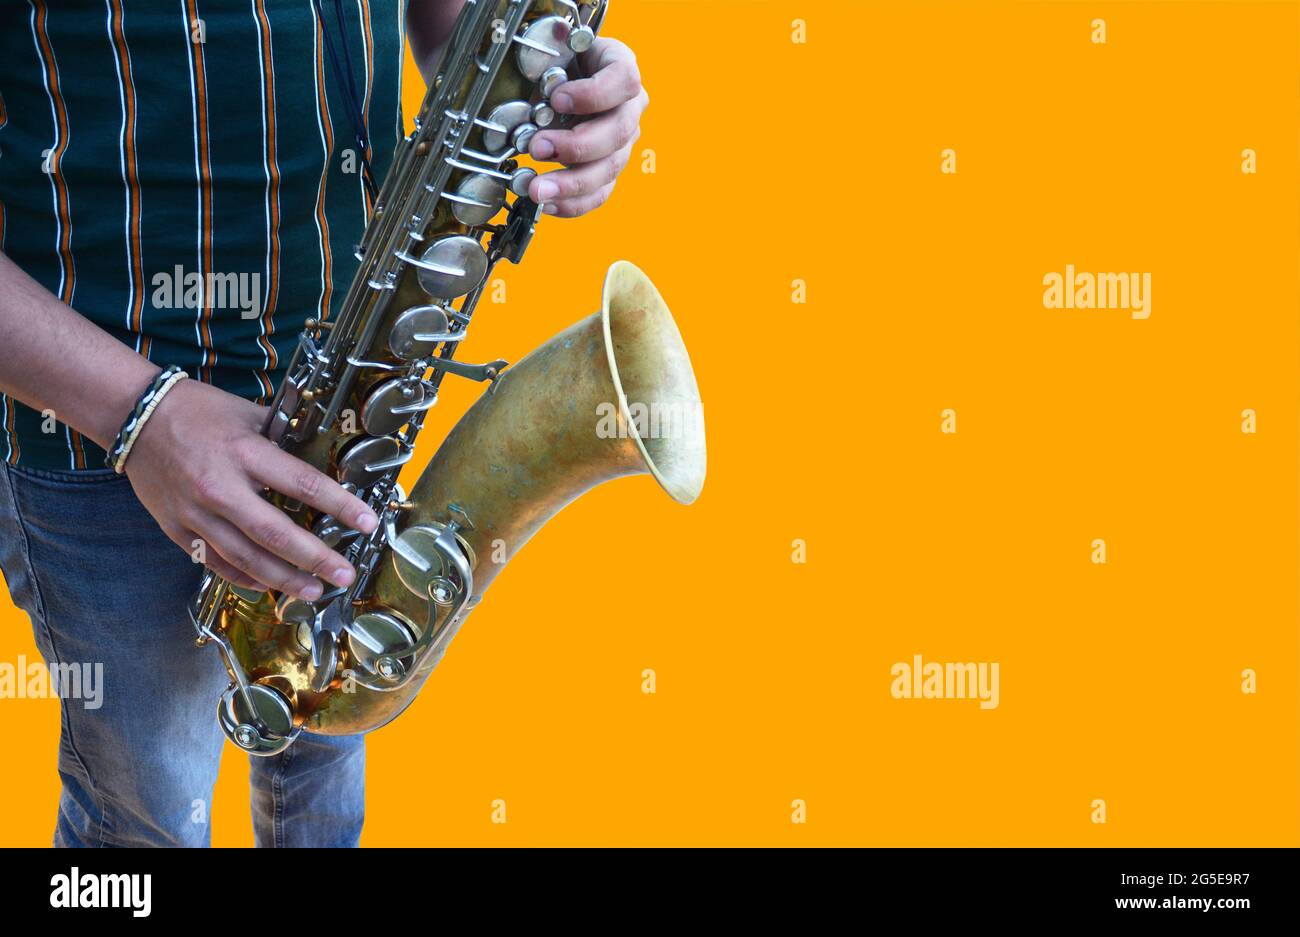 a detail of a saxophone isolated on a orange background Stock Photo